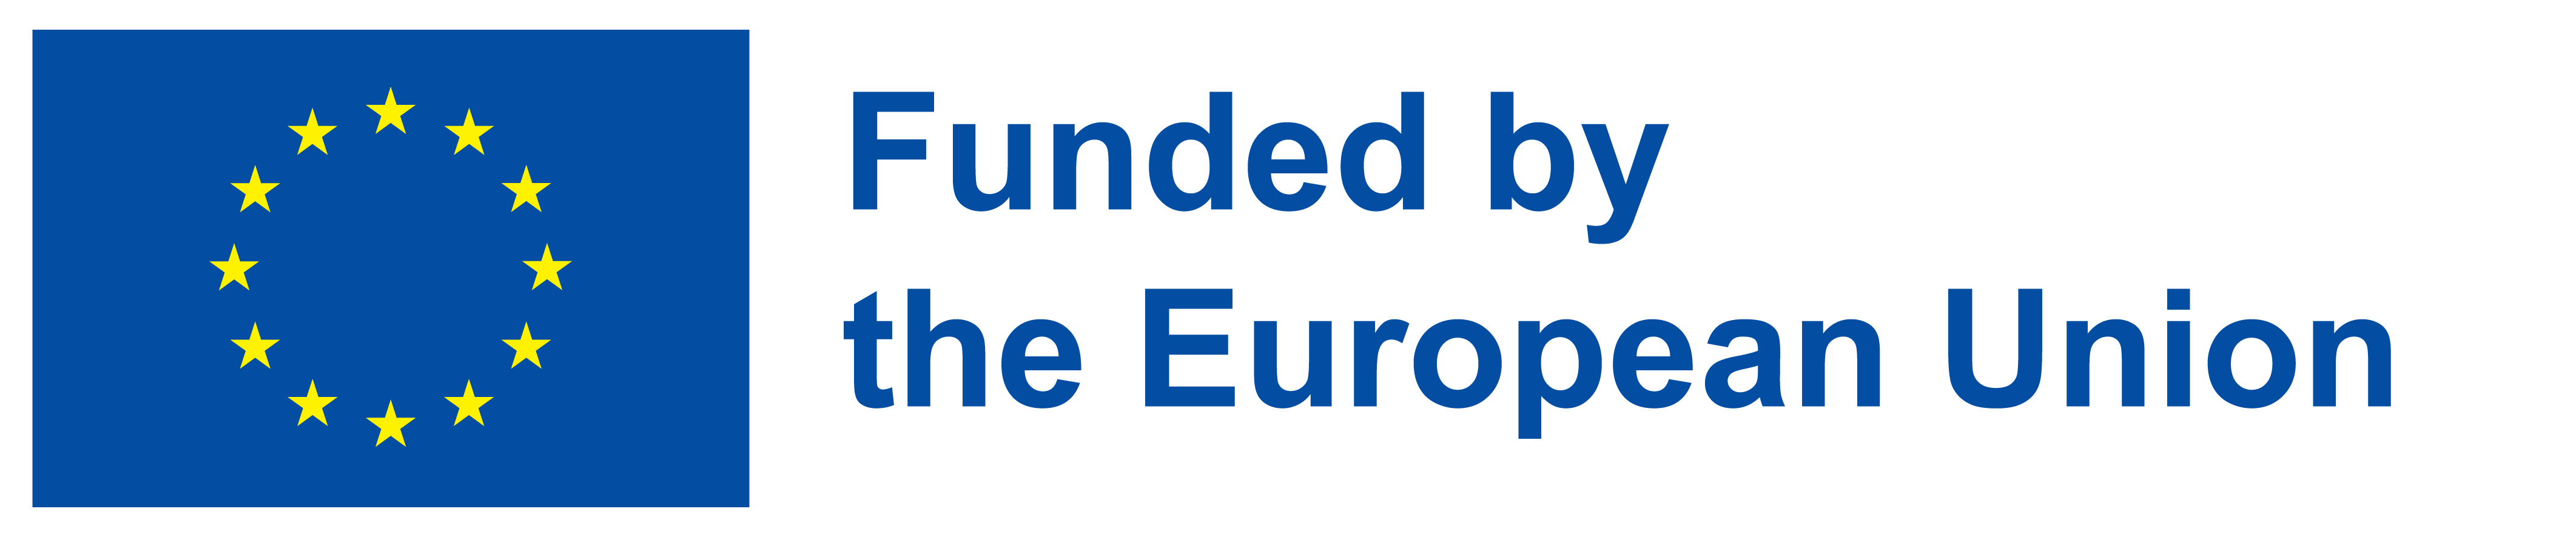 Funded by EU Logo 